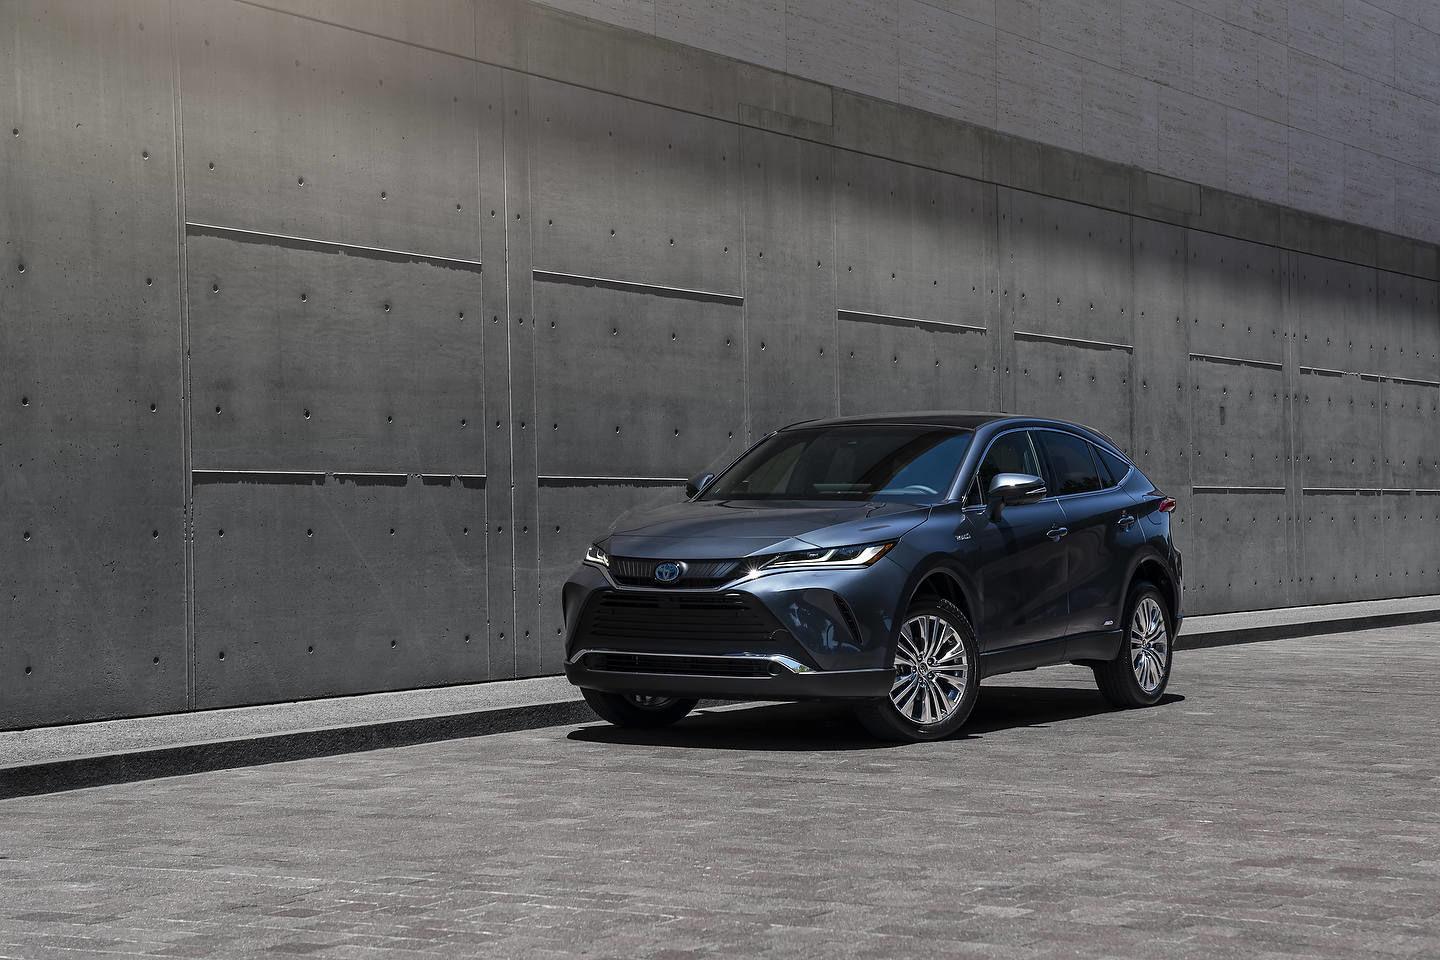 2021 Toyota Venza Expert Reviews Are Out